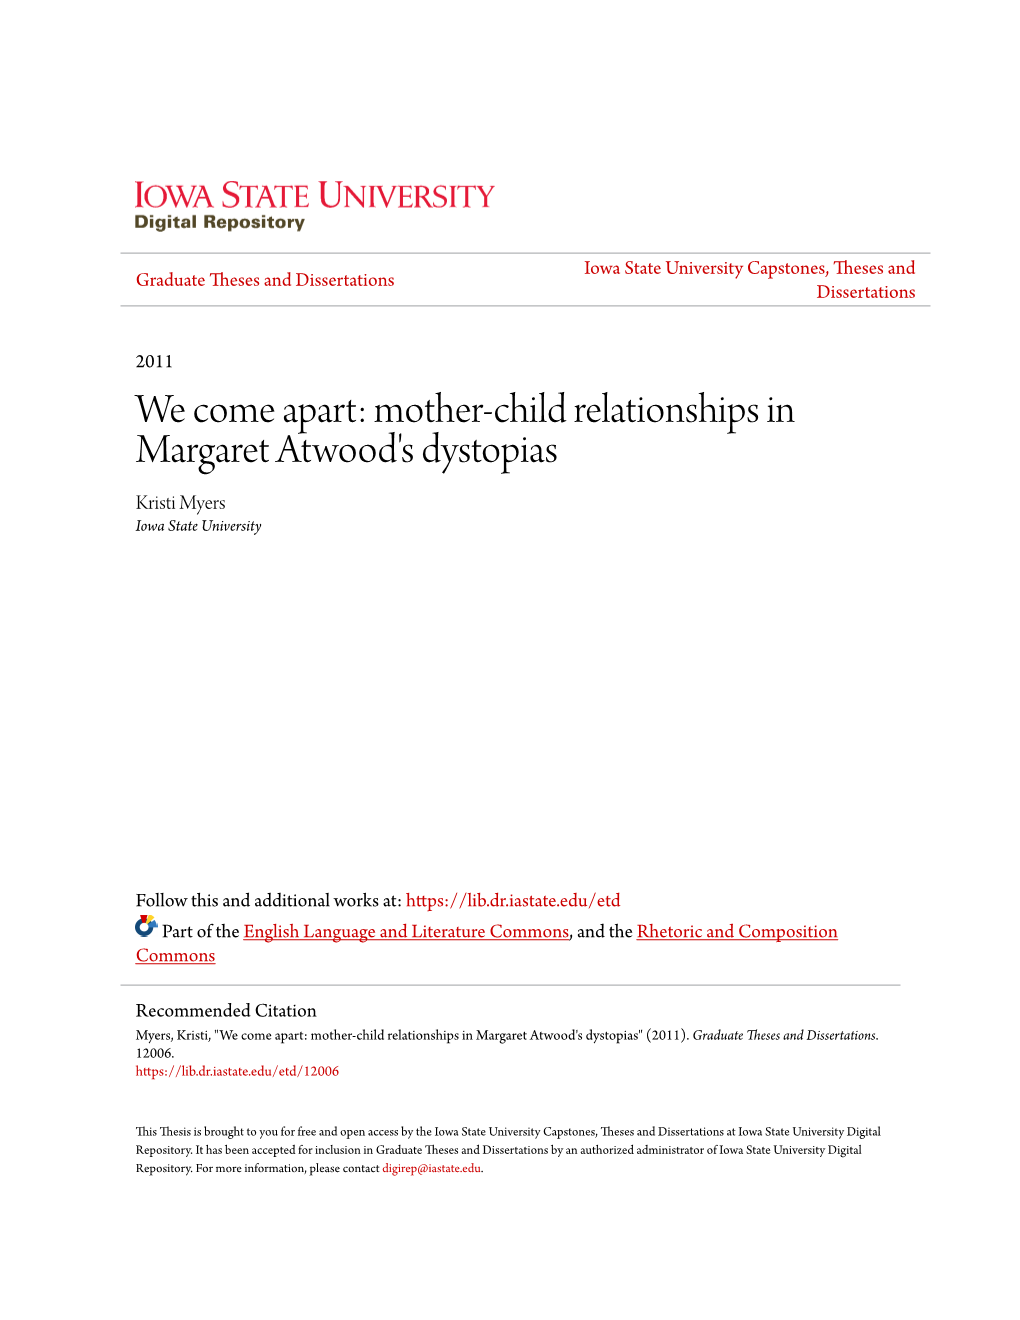 Mother-Child Relationships in Margaret Atwood's Dystopias Kristi Myers Iowa State University